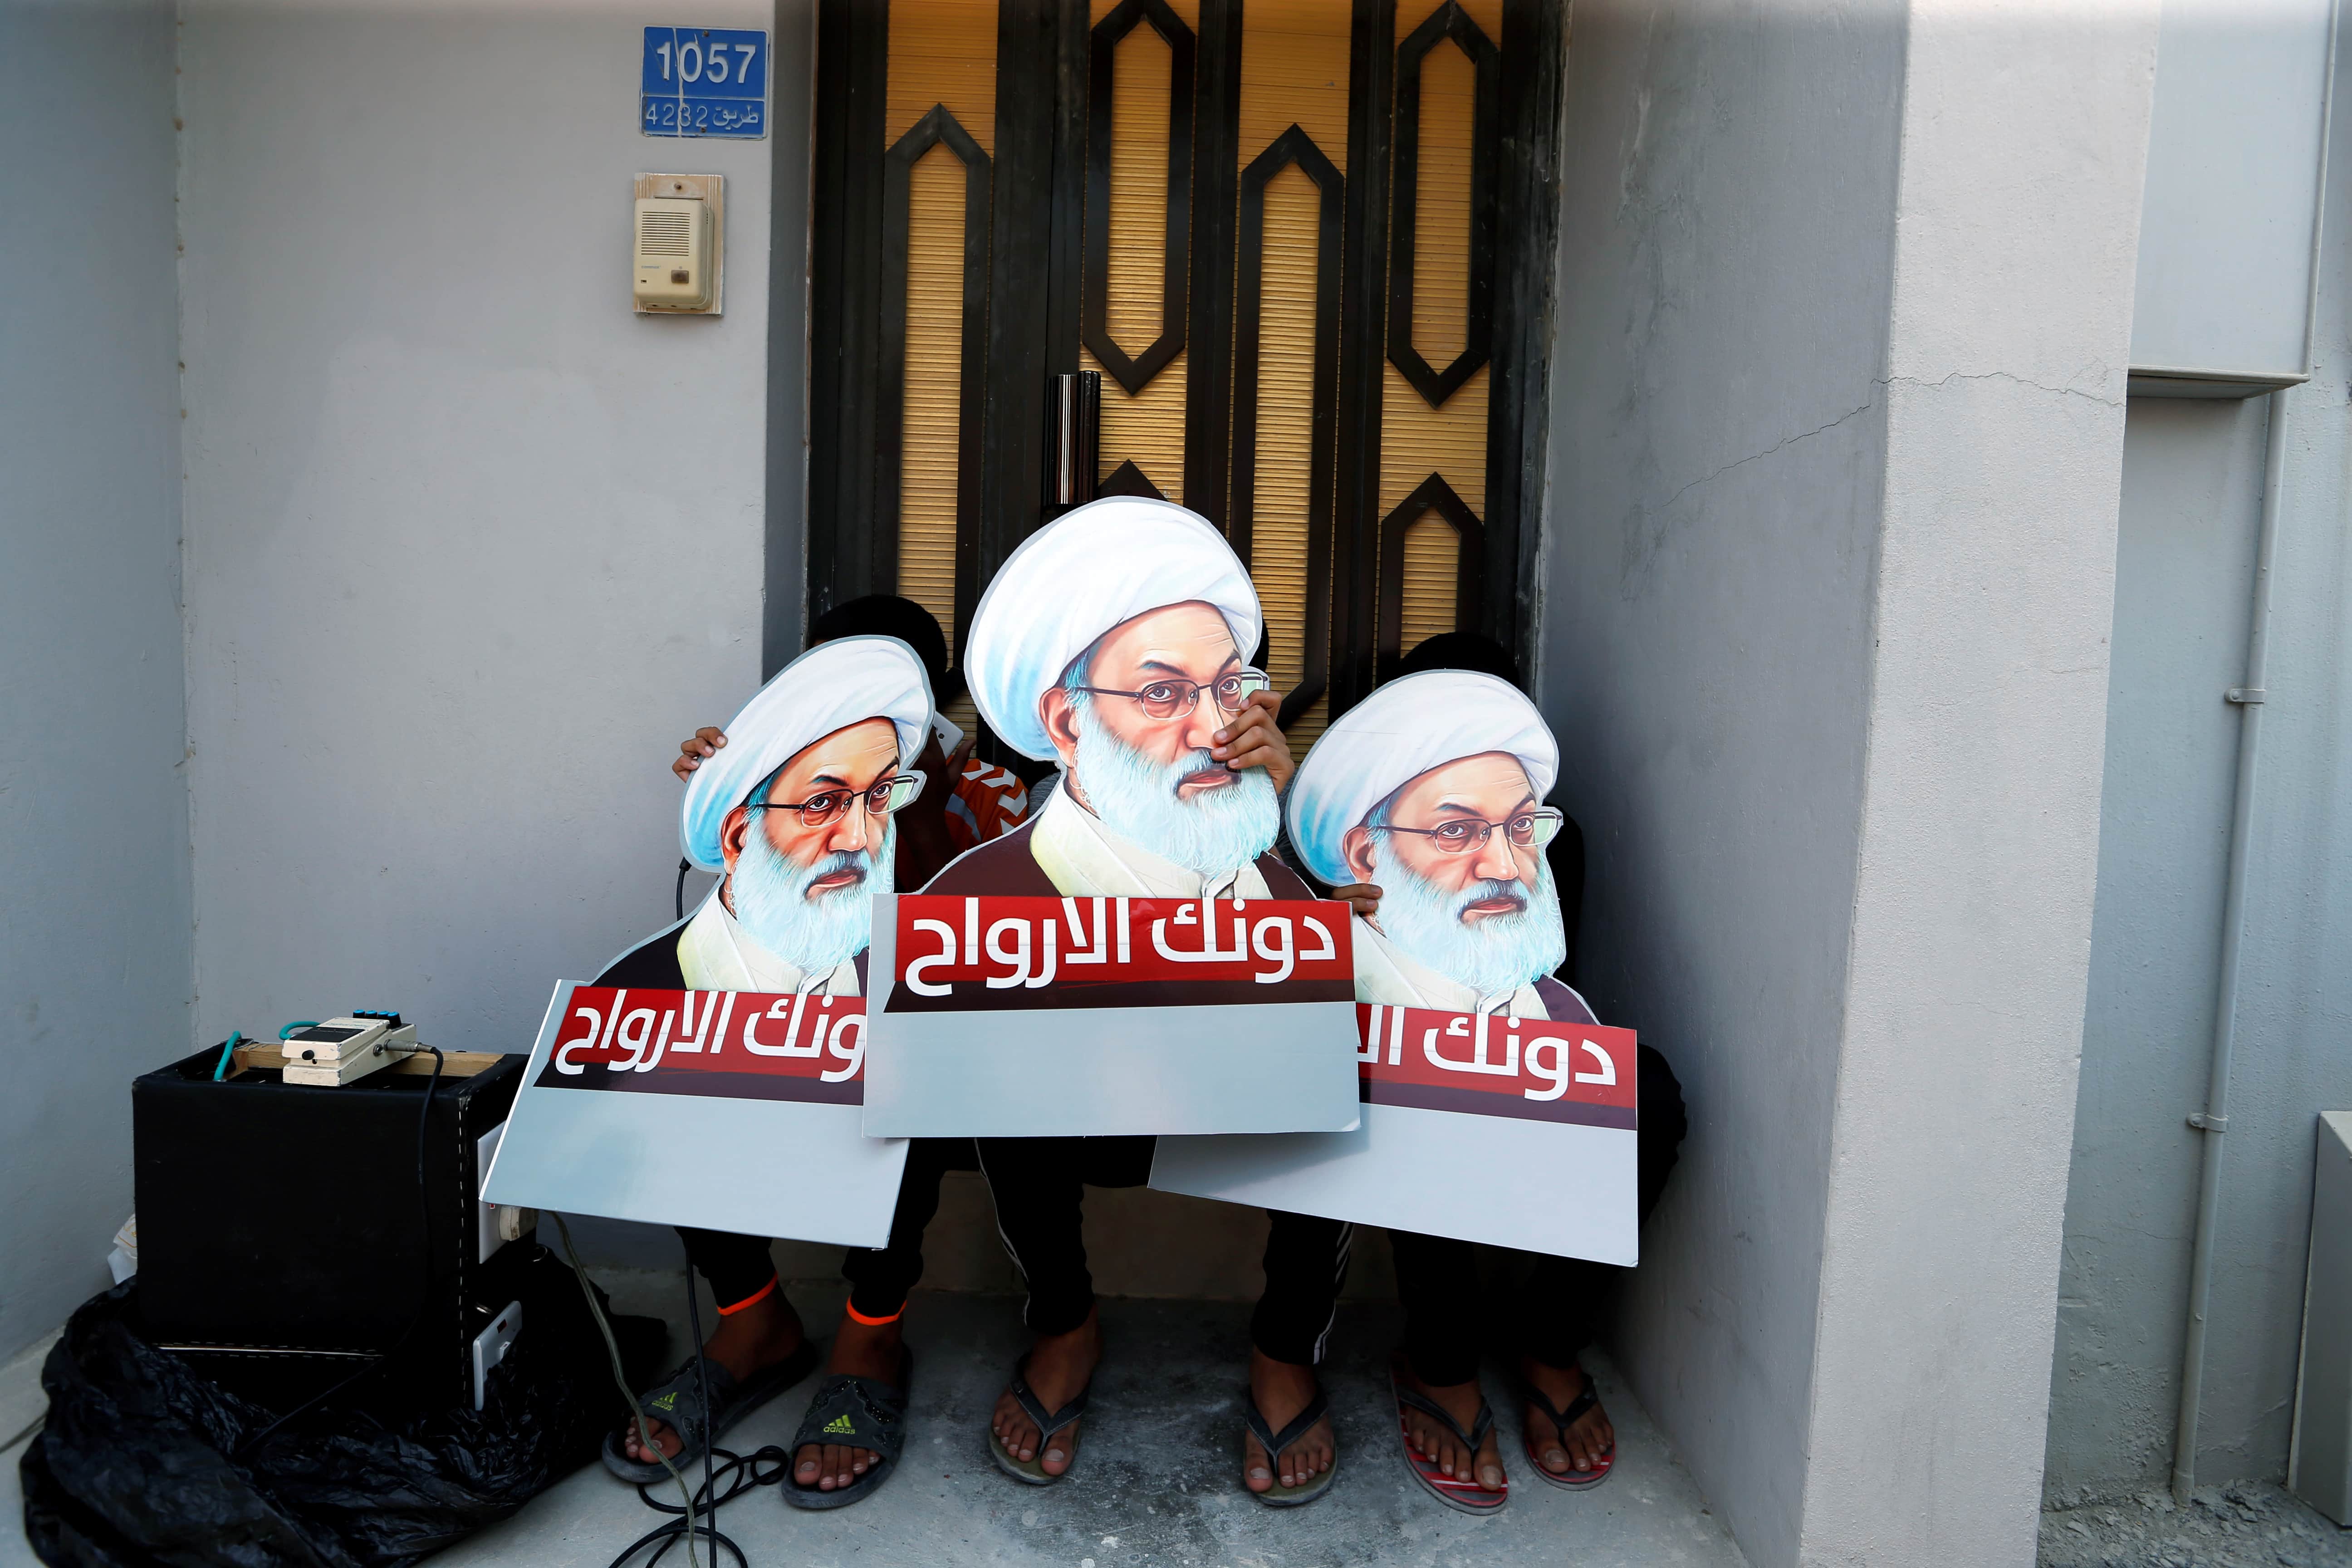 Protesters holding placards with images of Bahrain's leading Shi'ite cleric Isa Qassim, take part in an anti-government protest in the village of Diraz, 12 August 2016, REUTERS/Hamad I Mohammed